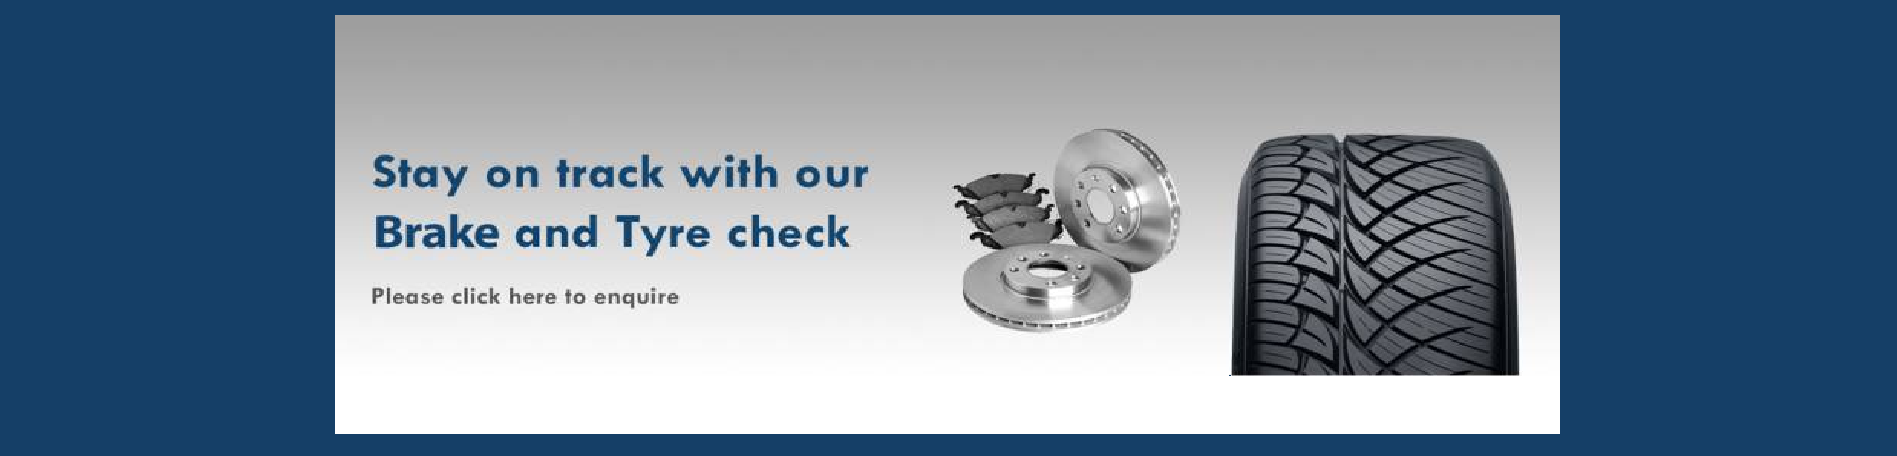 Stay on track with our Brake and Tyre check